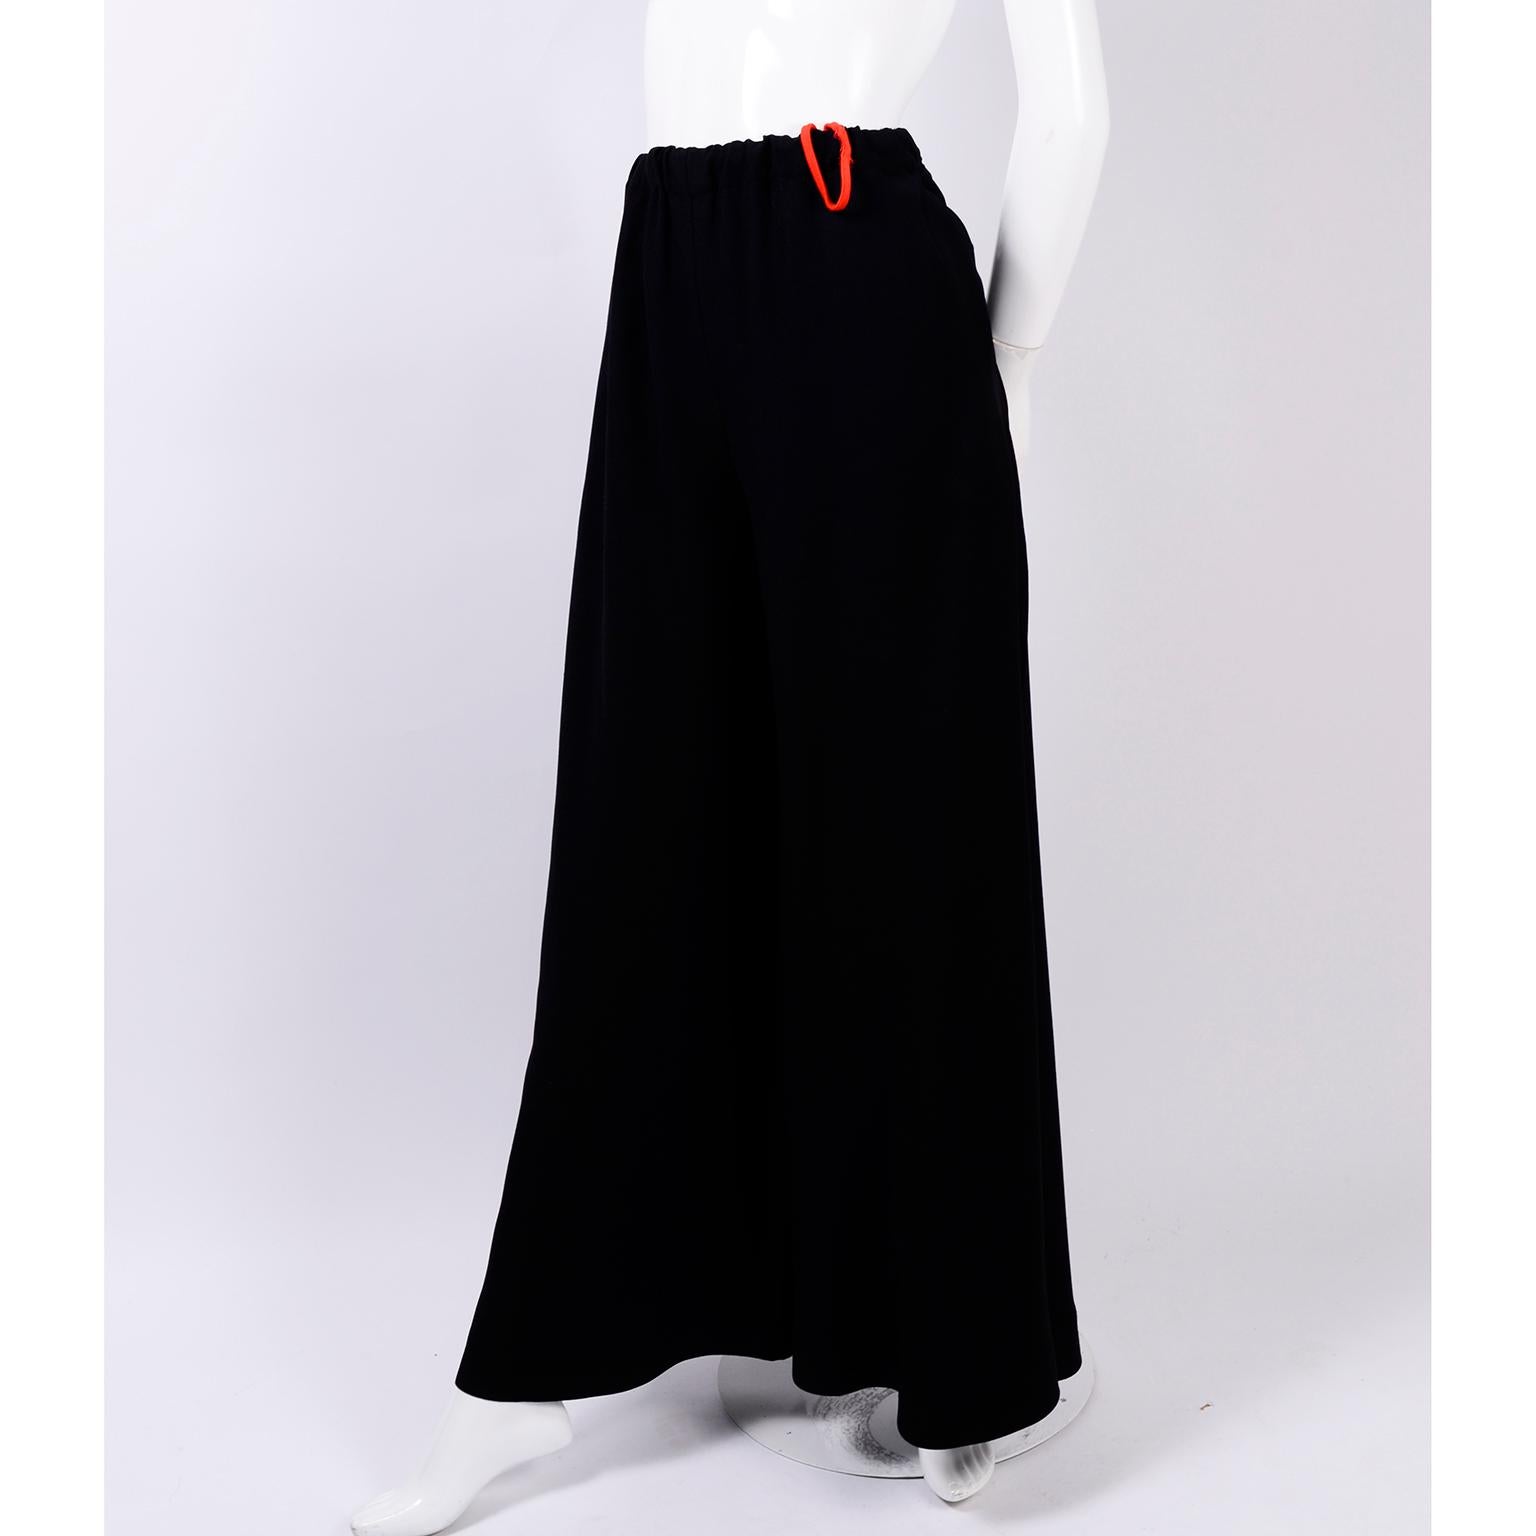 These are absolutely amazing vintage Anne Klein and Company black elastic waist pants with an extremely wide leg. Looks like a full maxi skirt when worn, each leg could make its own skirt! The extra fabric in the extremely wide legs creates tons of